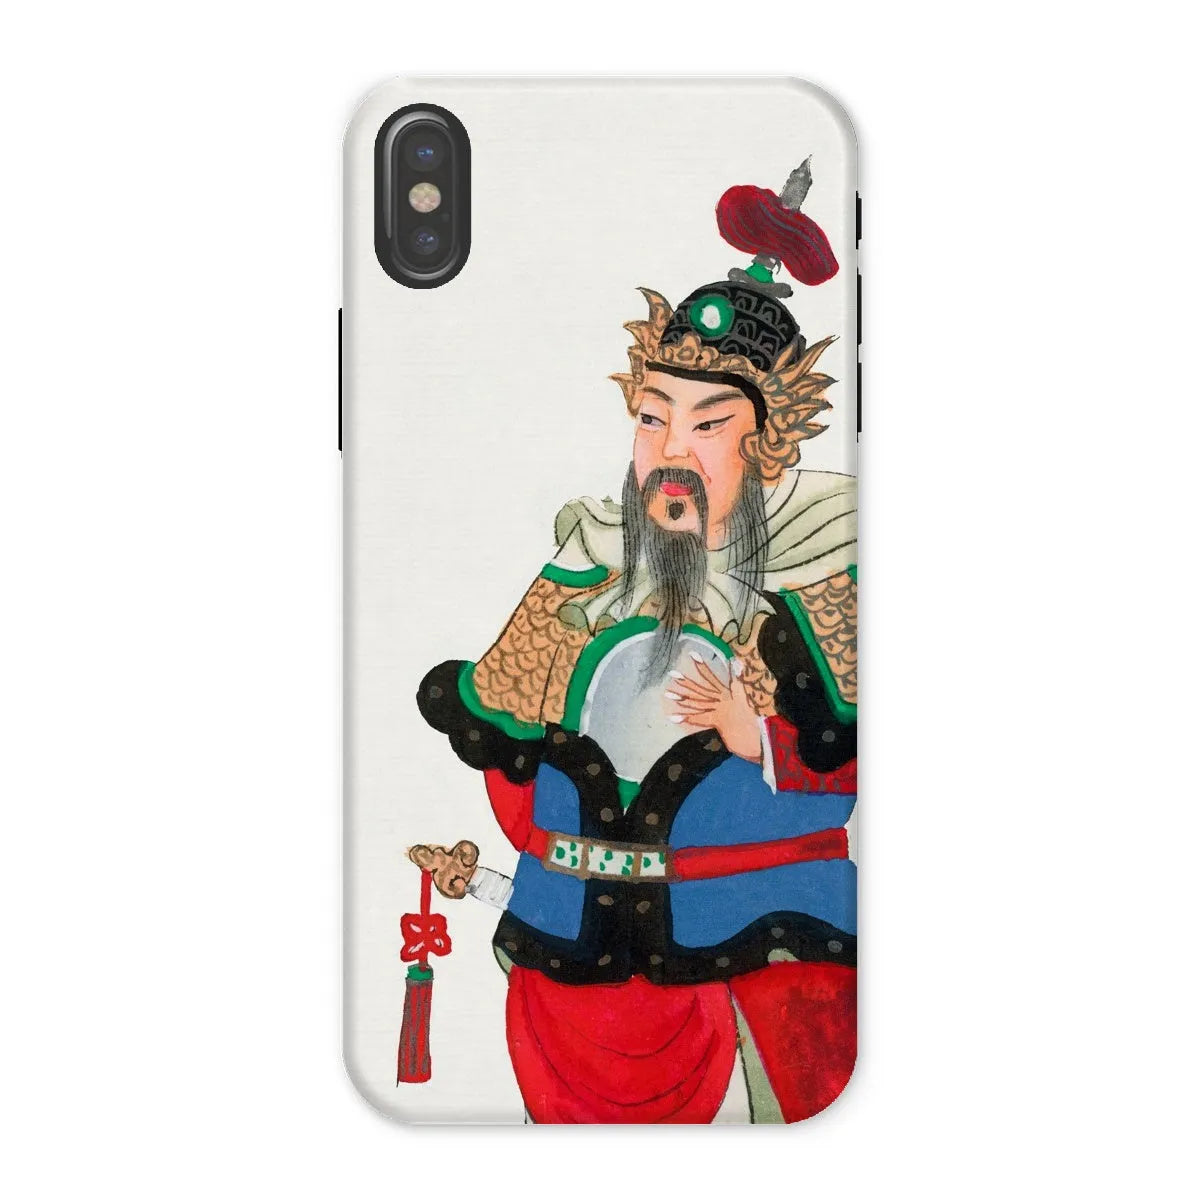 Military Commander - Aesthetic Chinese Art Phone Case - Iphone x / Matte - Mobile Phone Cases - Aesthetic Art